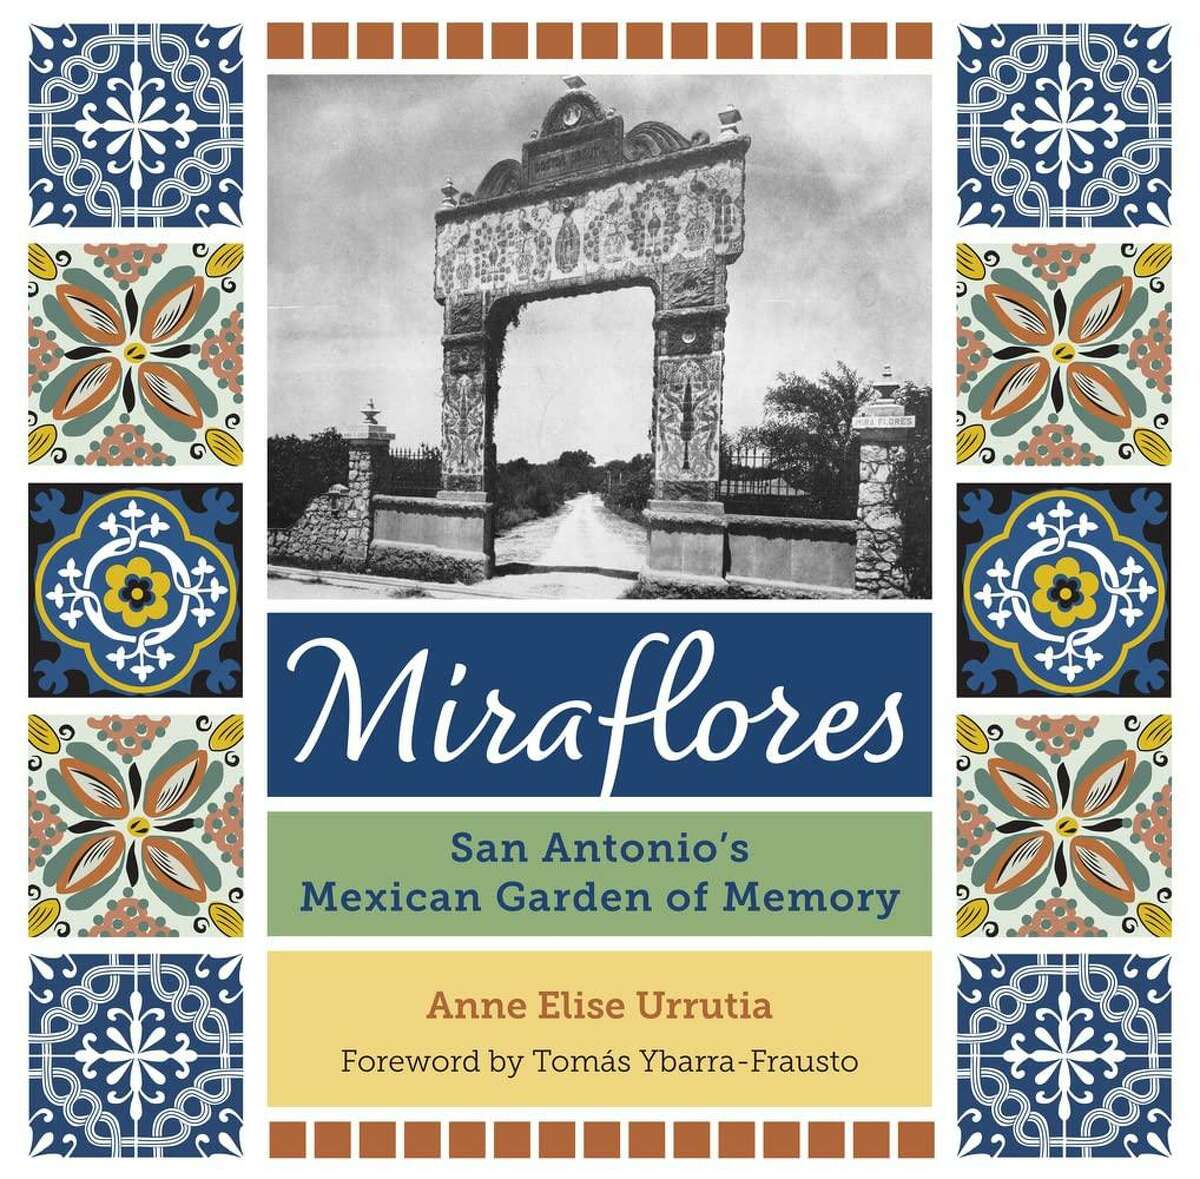 The truth behind Miraflores garden is explored in a new book.